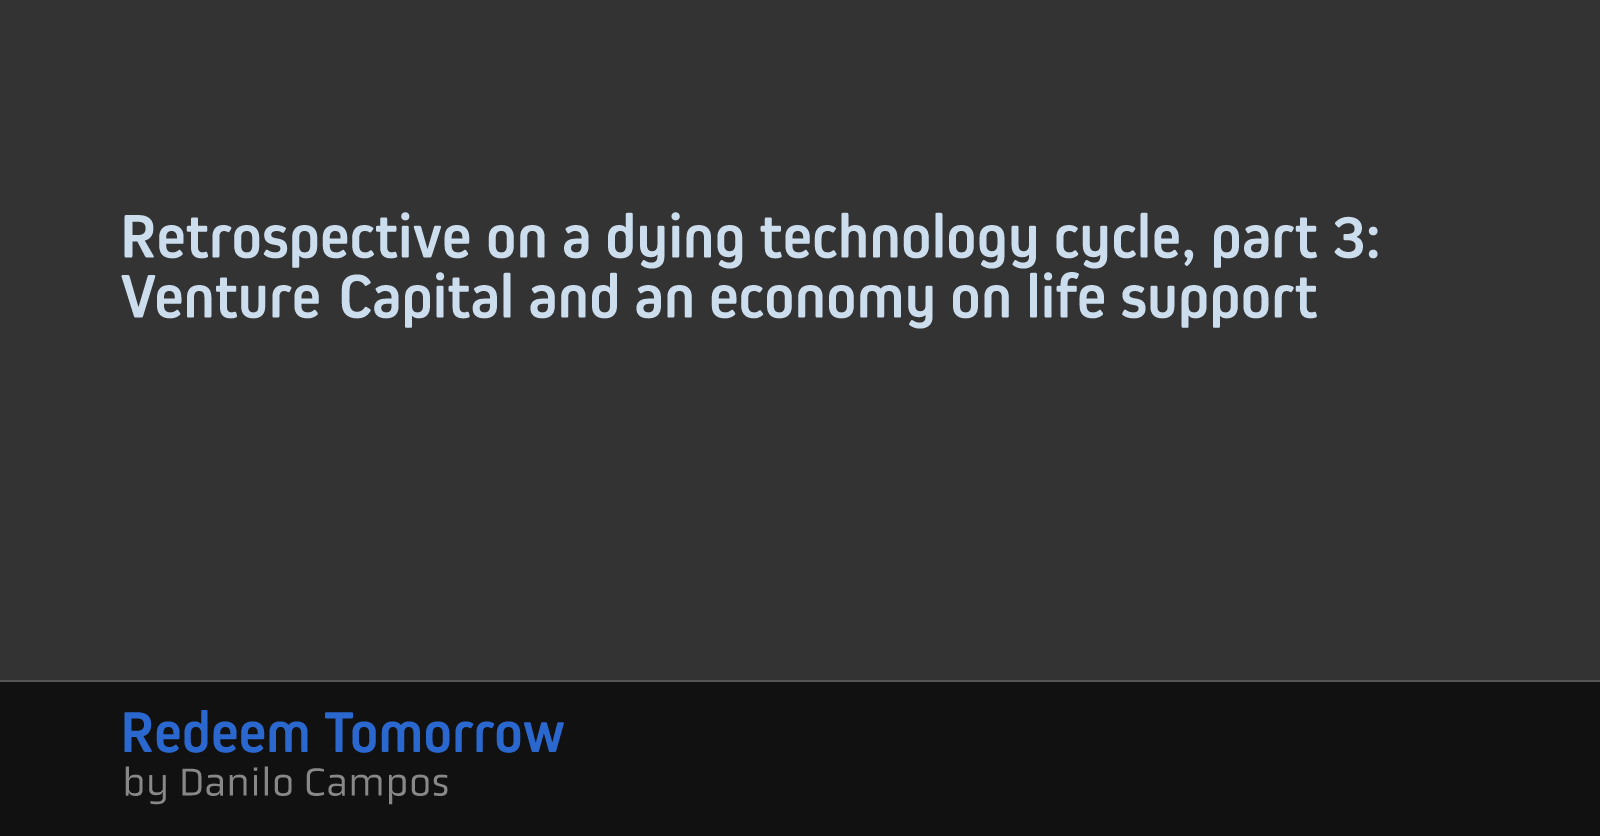 Retrospective on a dying technology cycle, part 3: Venture Capital and an economy on life support